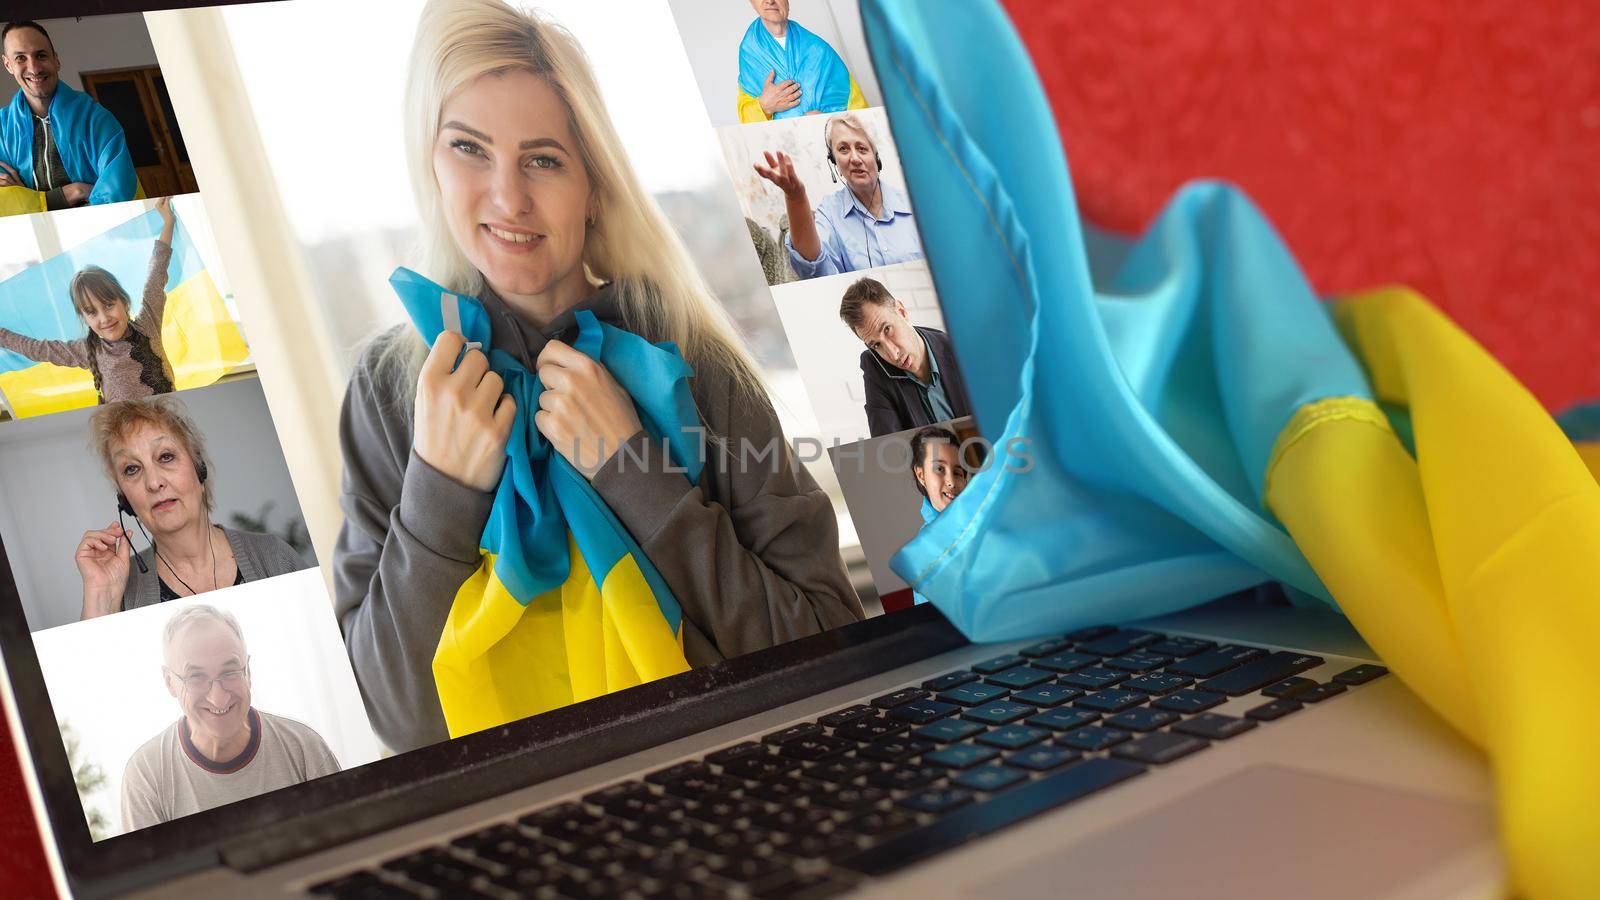 flag of ukraine, young woman teacher working with laptop sitting in classroom. Education, school college university.